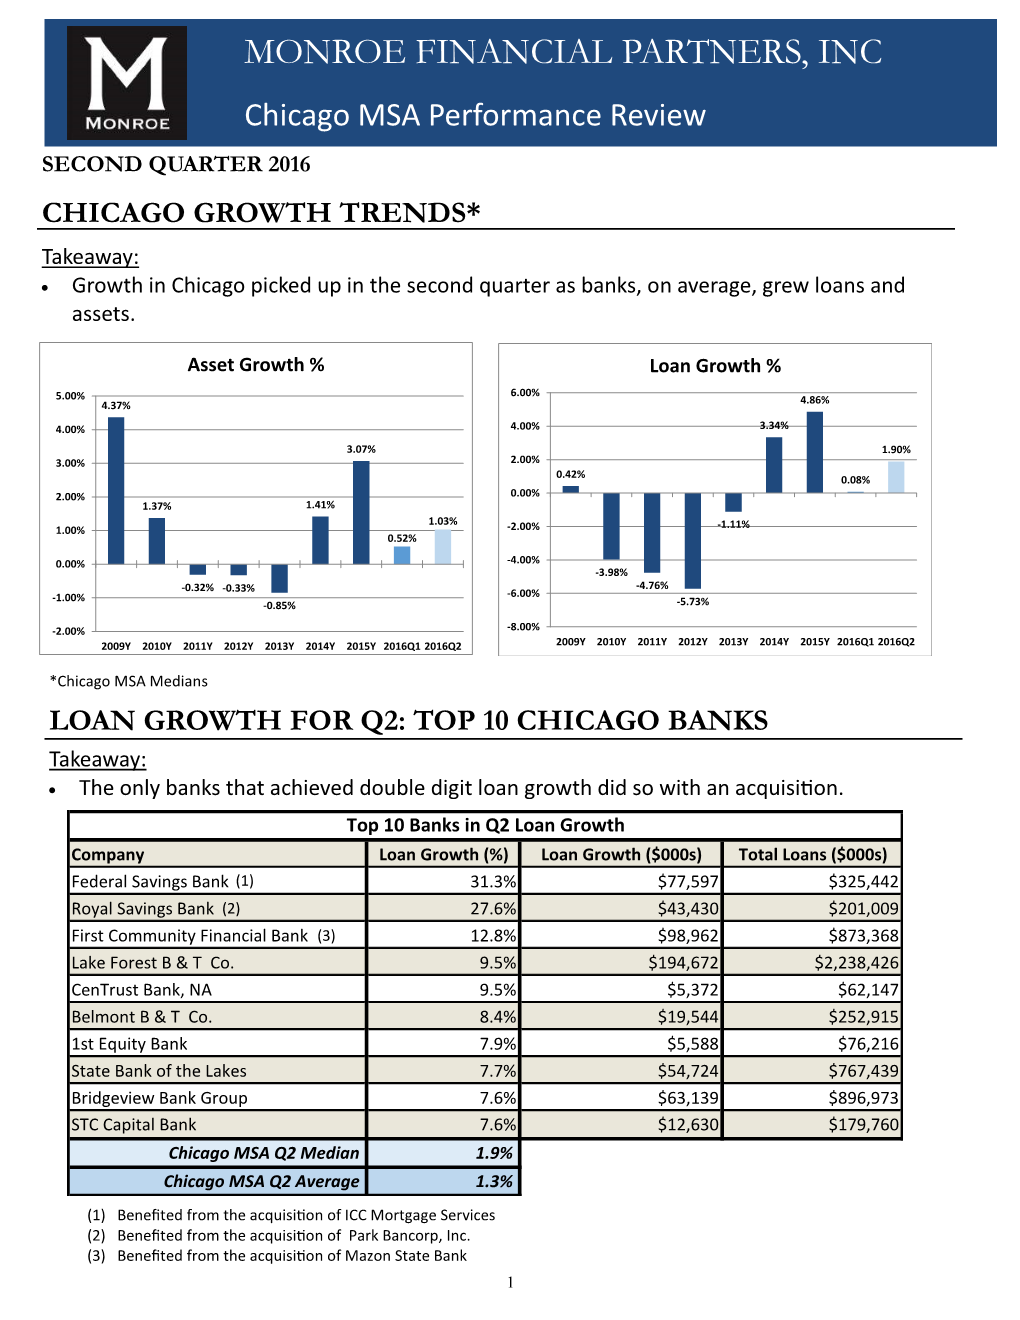 TOP 10 CHICAGO BANKS Takeaway:  the Only Banks That Achieved Double Digit Loan Growth Did So with an Acquisition